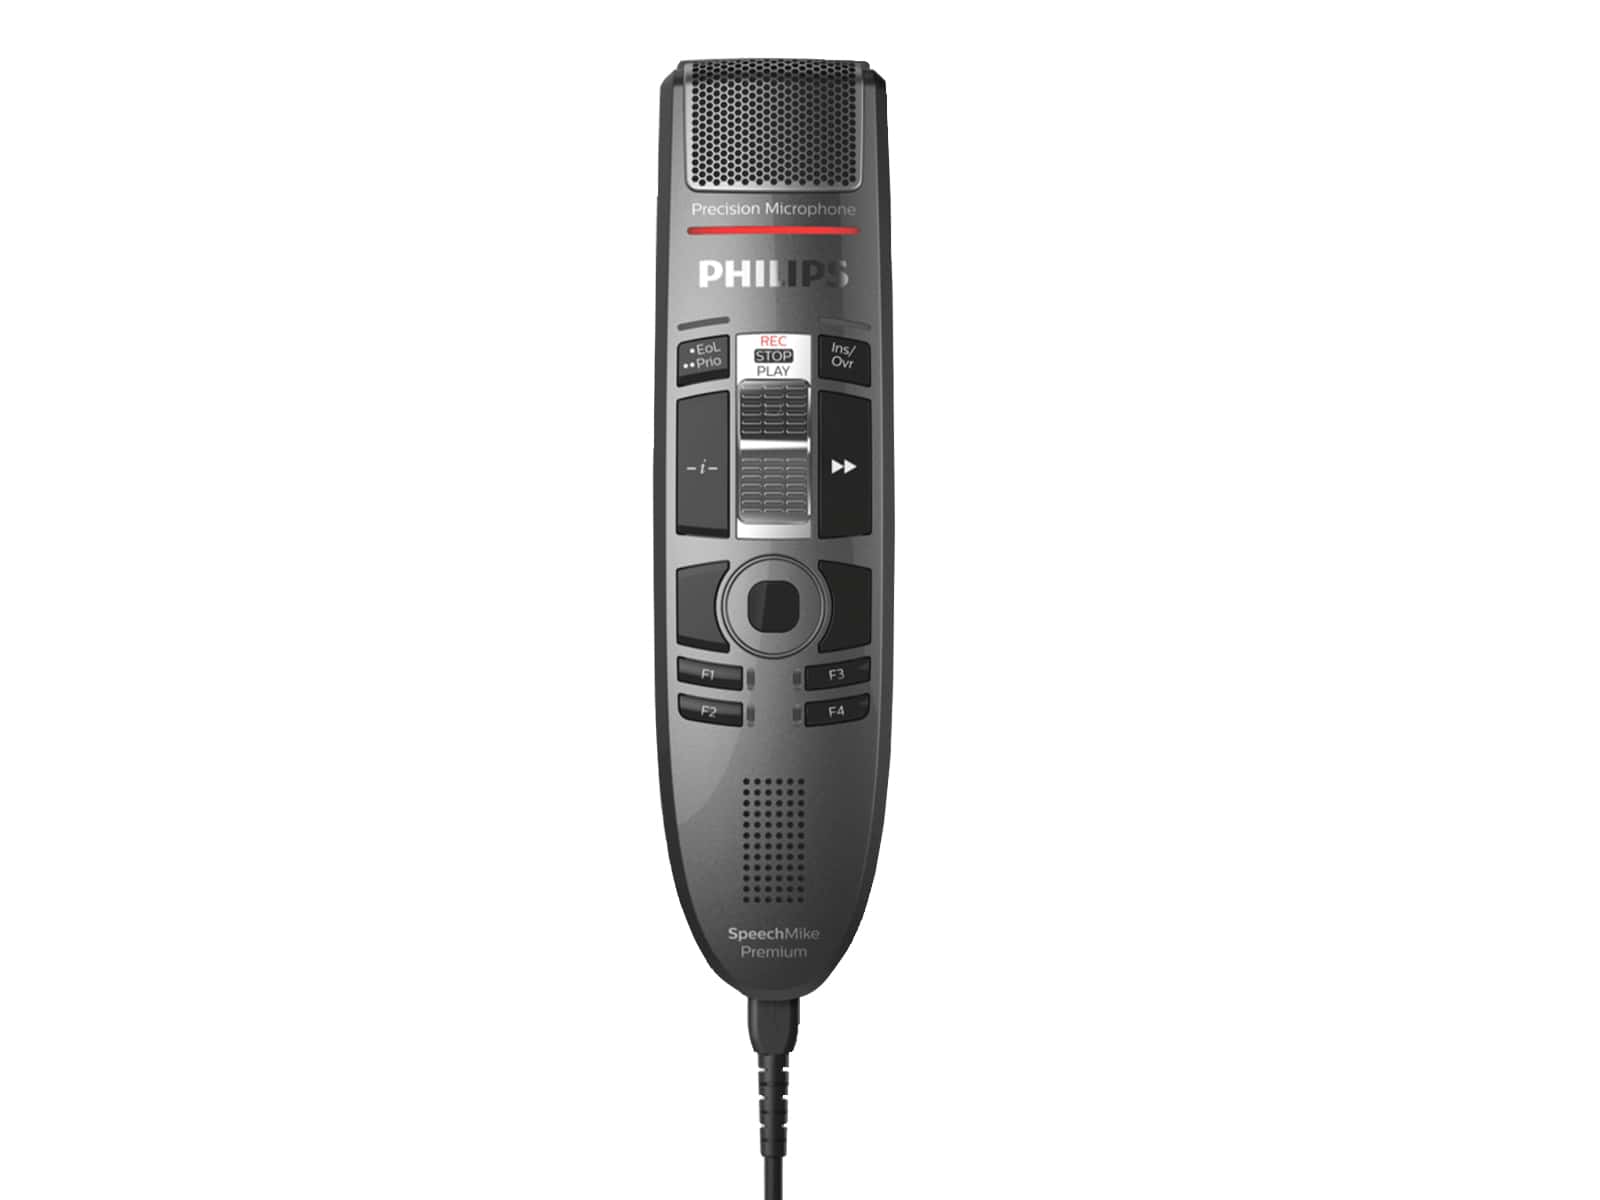 Philips SpeechMike Premium Touch Slide Switch Dictation Microphone with Bar-code Scanner (SMP3810)